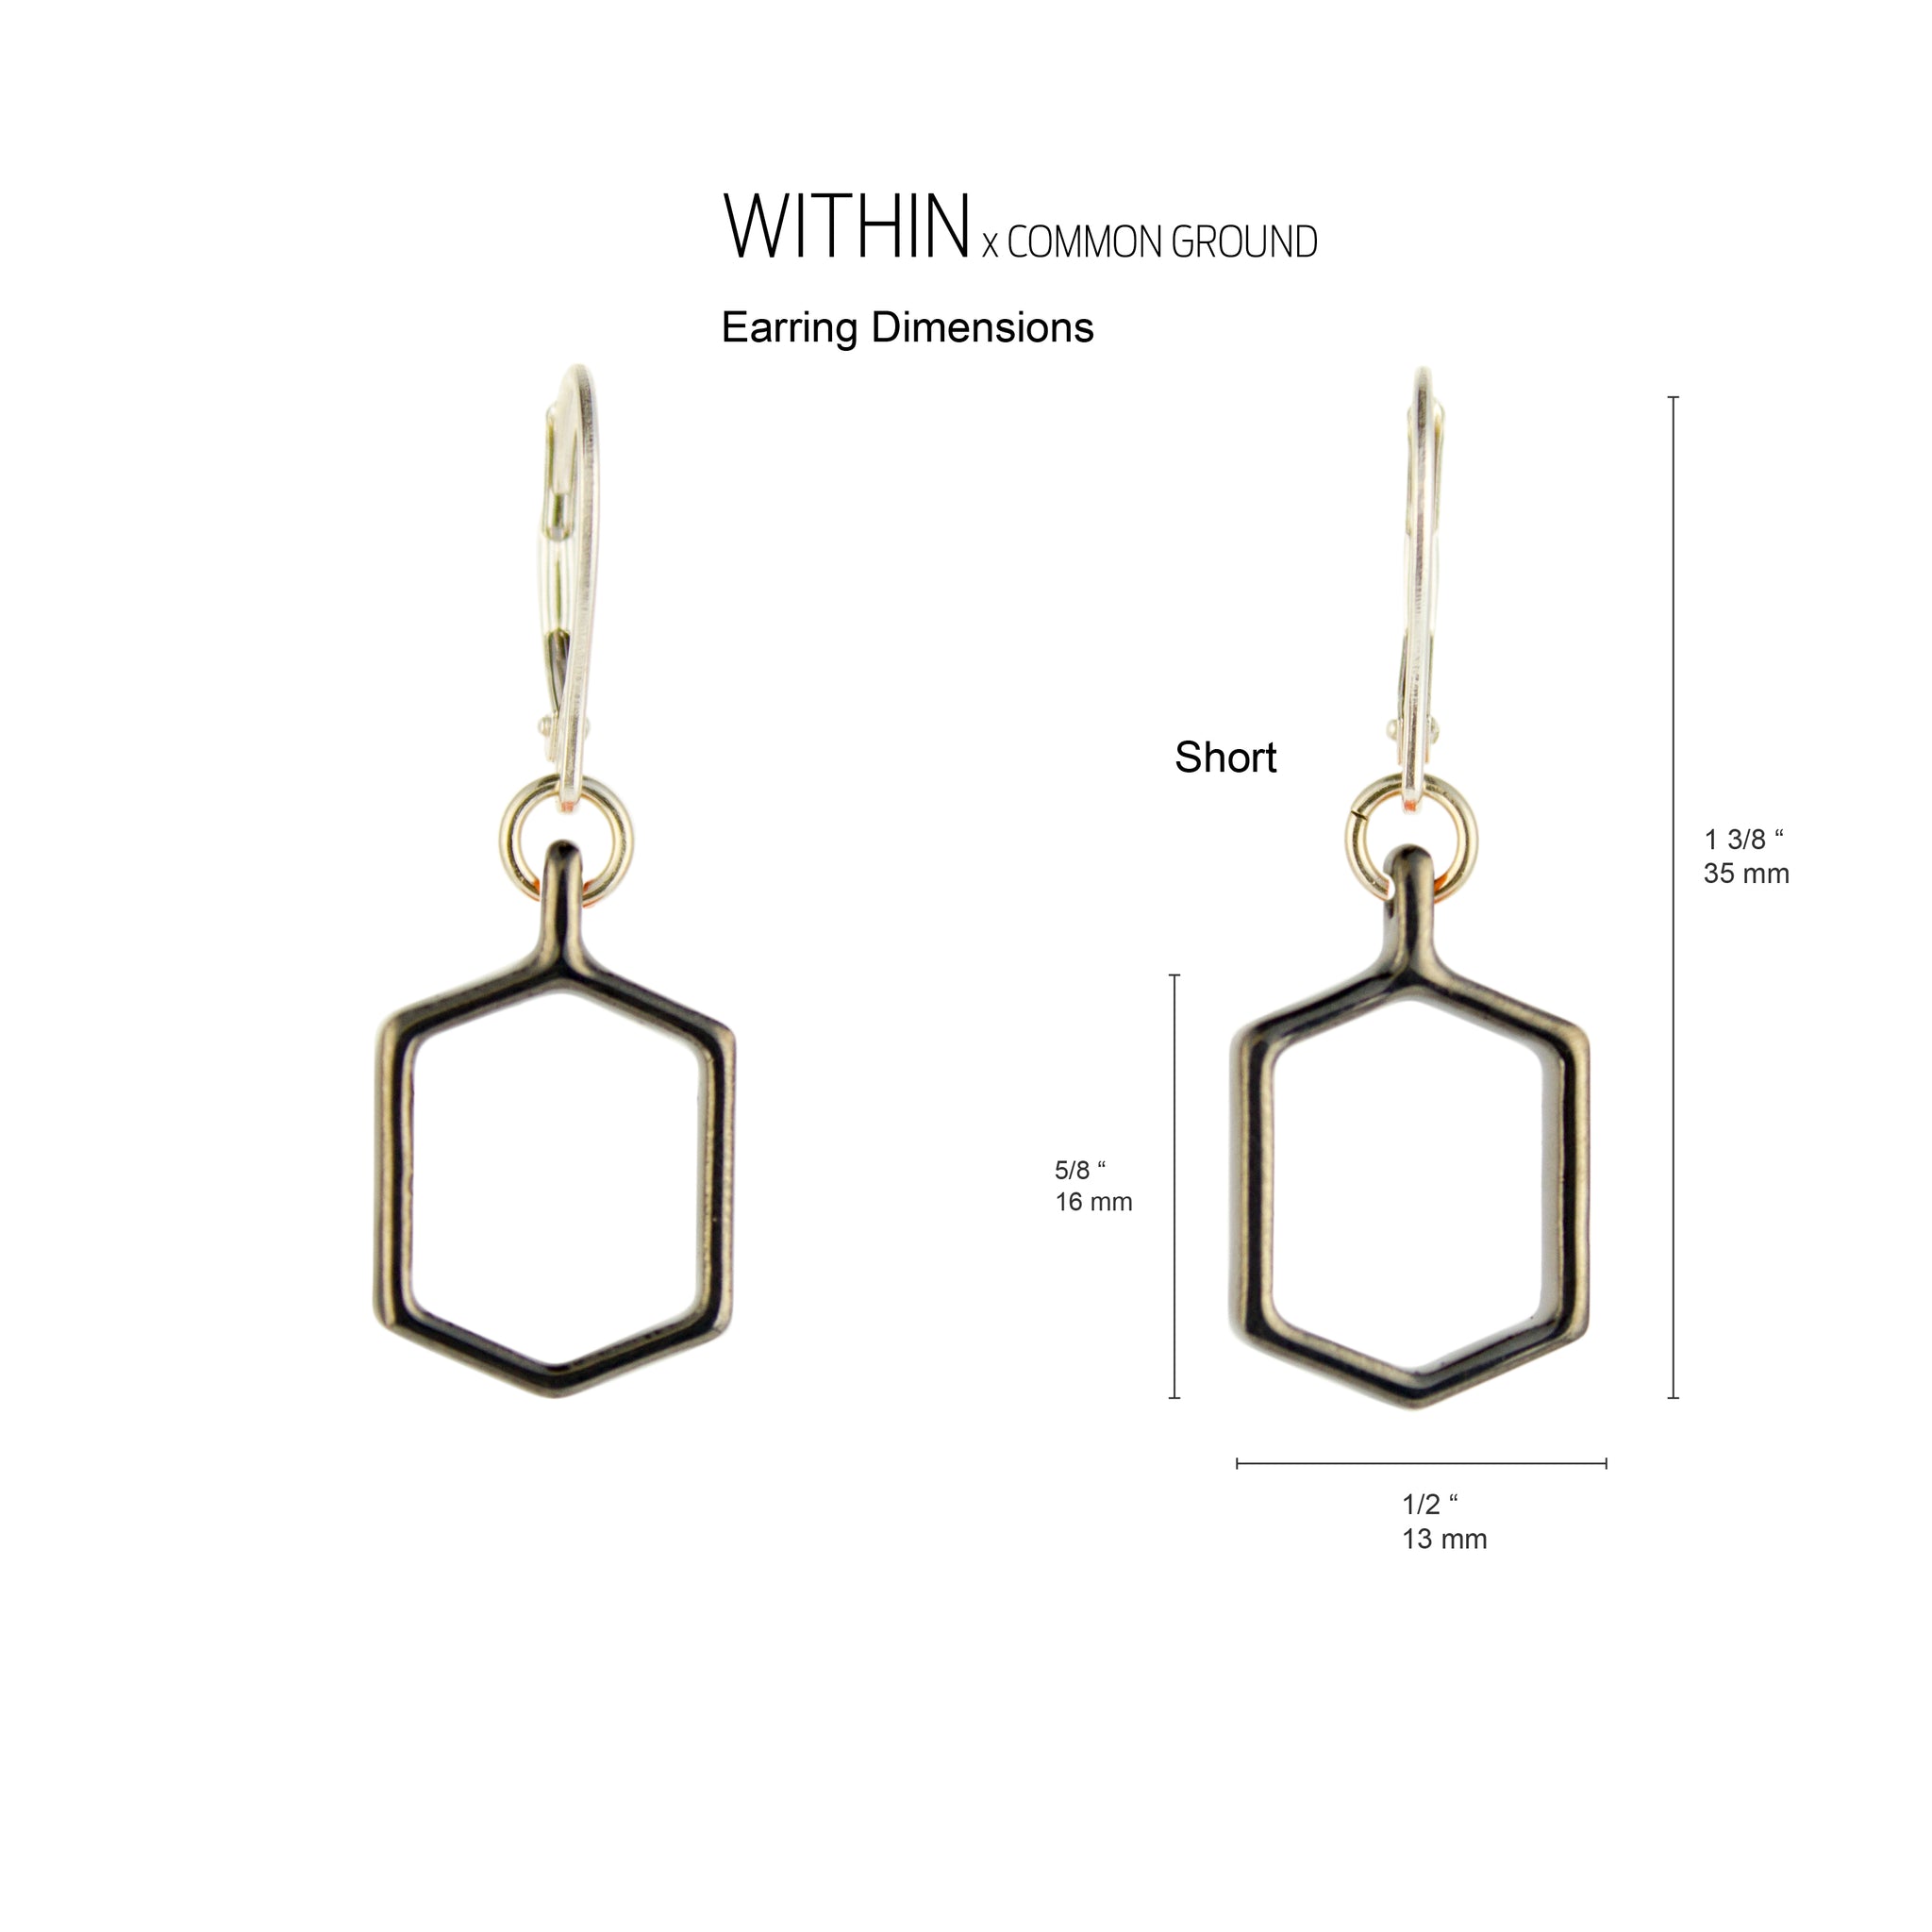 Super_Chrome - WITHIN x COMMON GROUND Earring Dim View